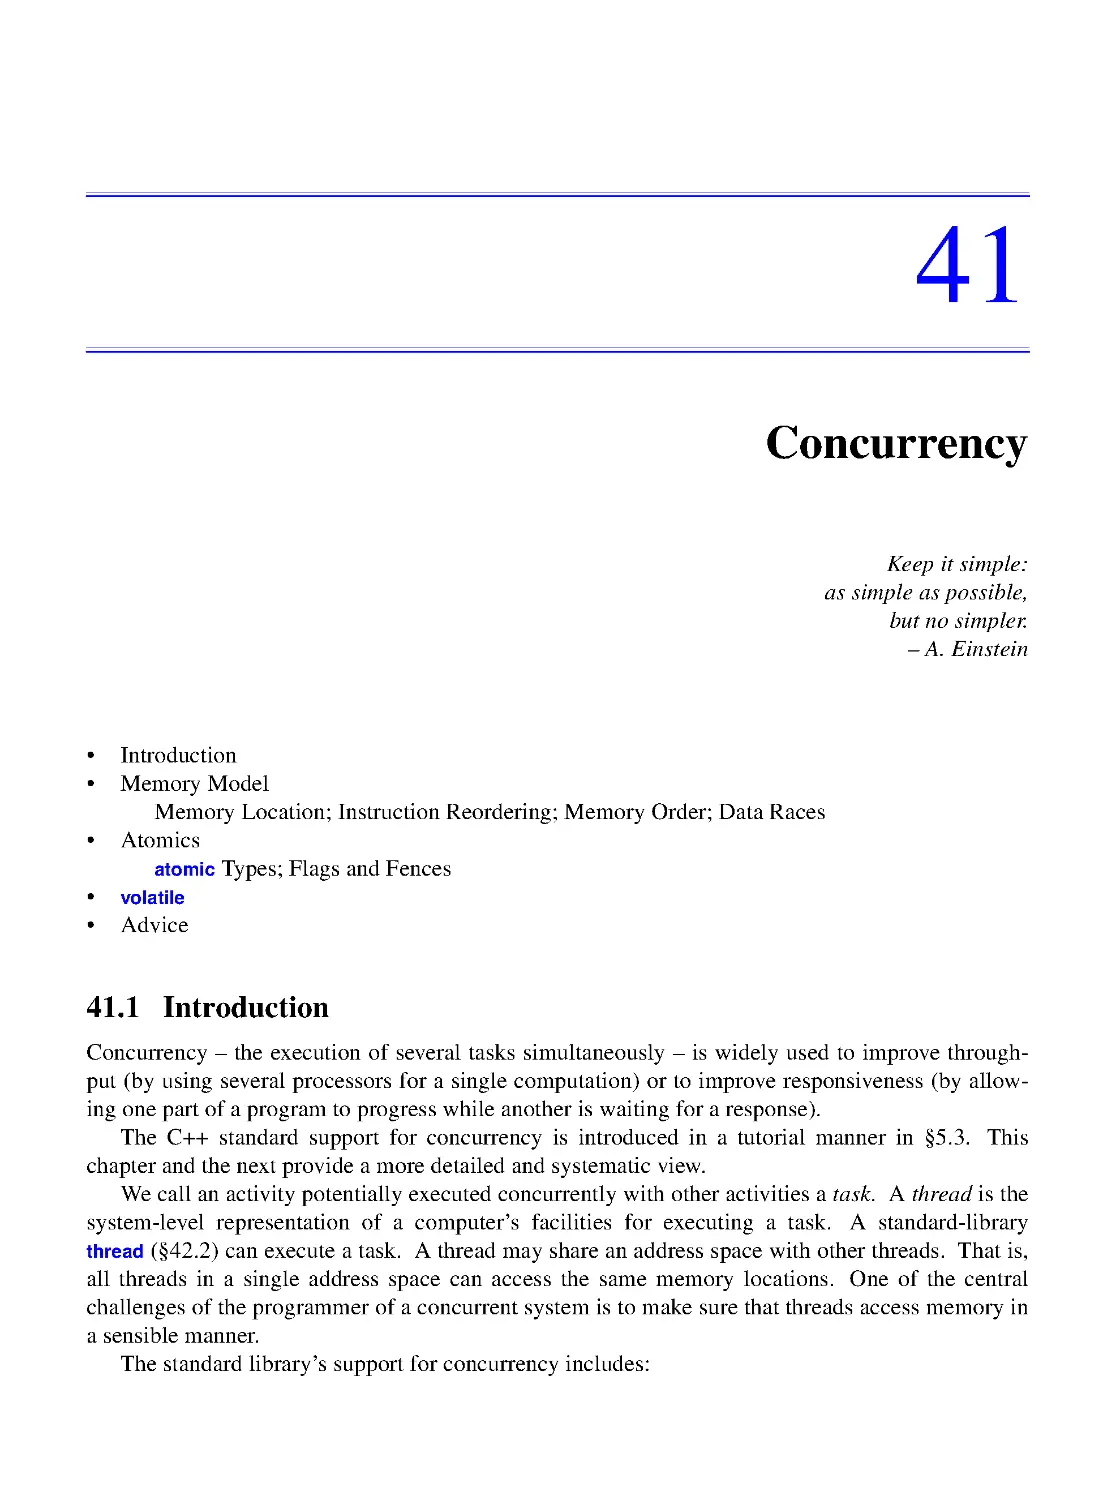 41. Concurrency